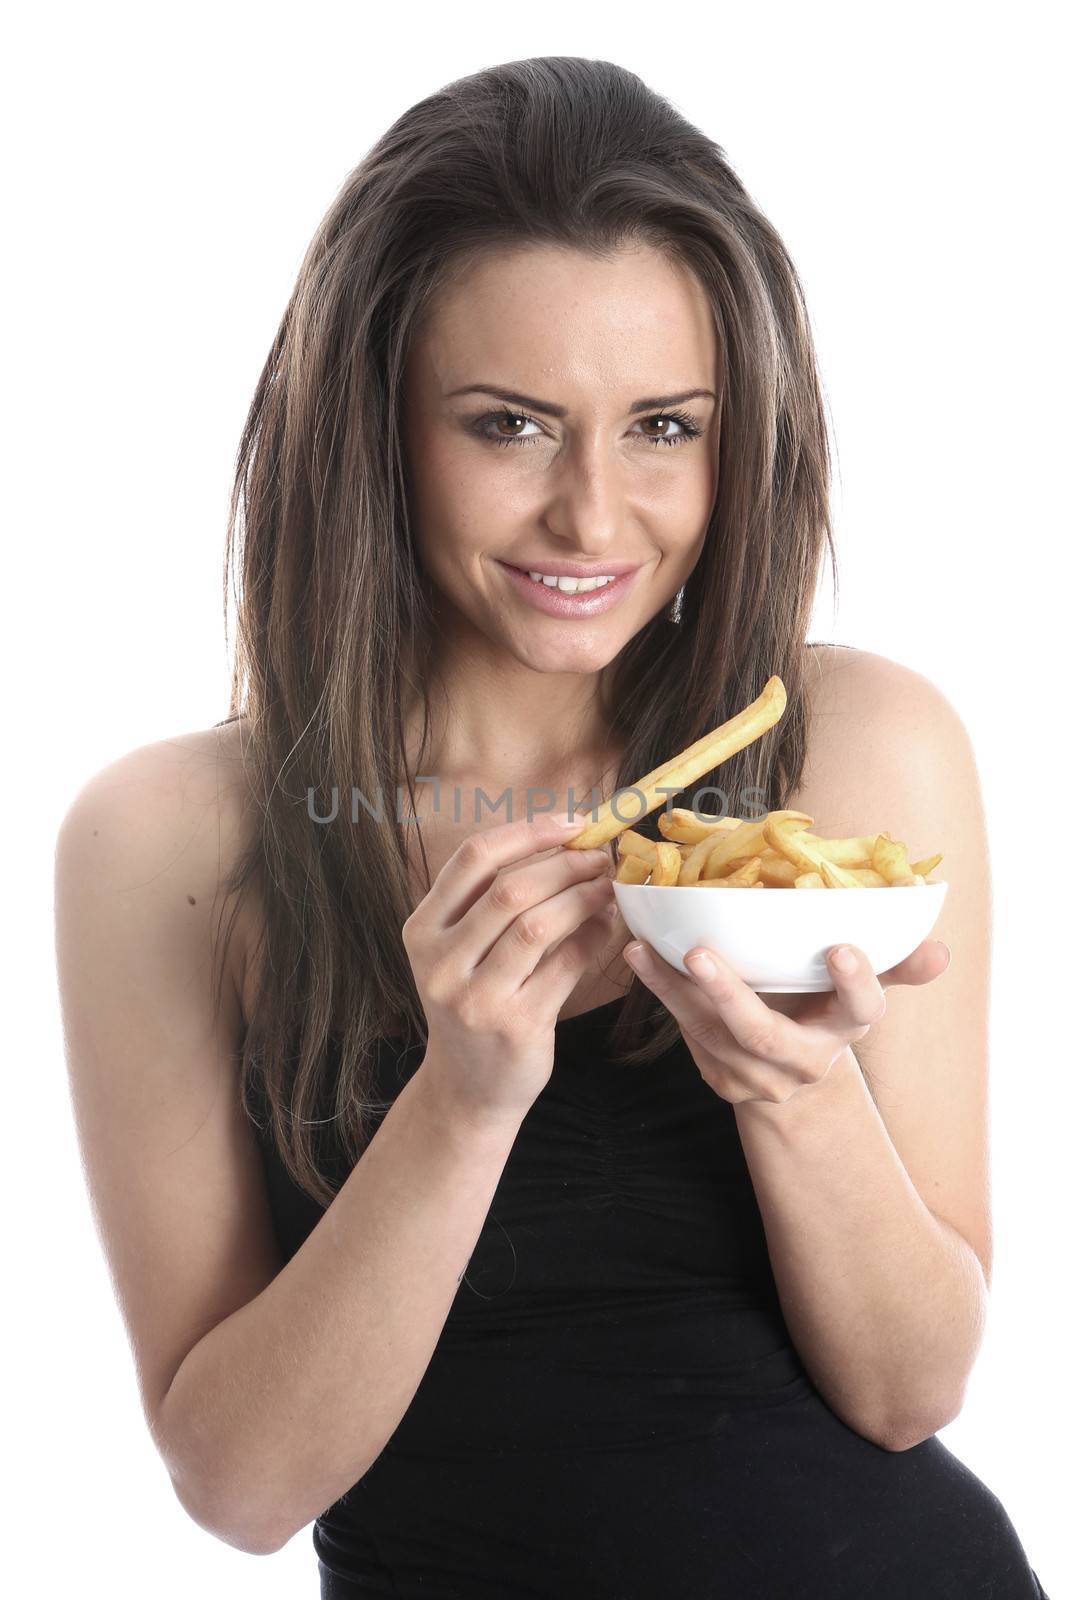 Model Released. Woman Eating Chips by Whiteboxmedia